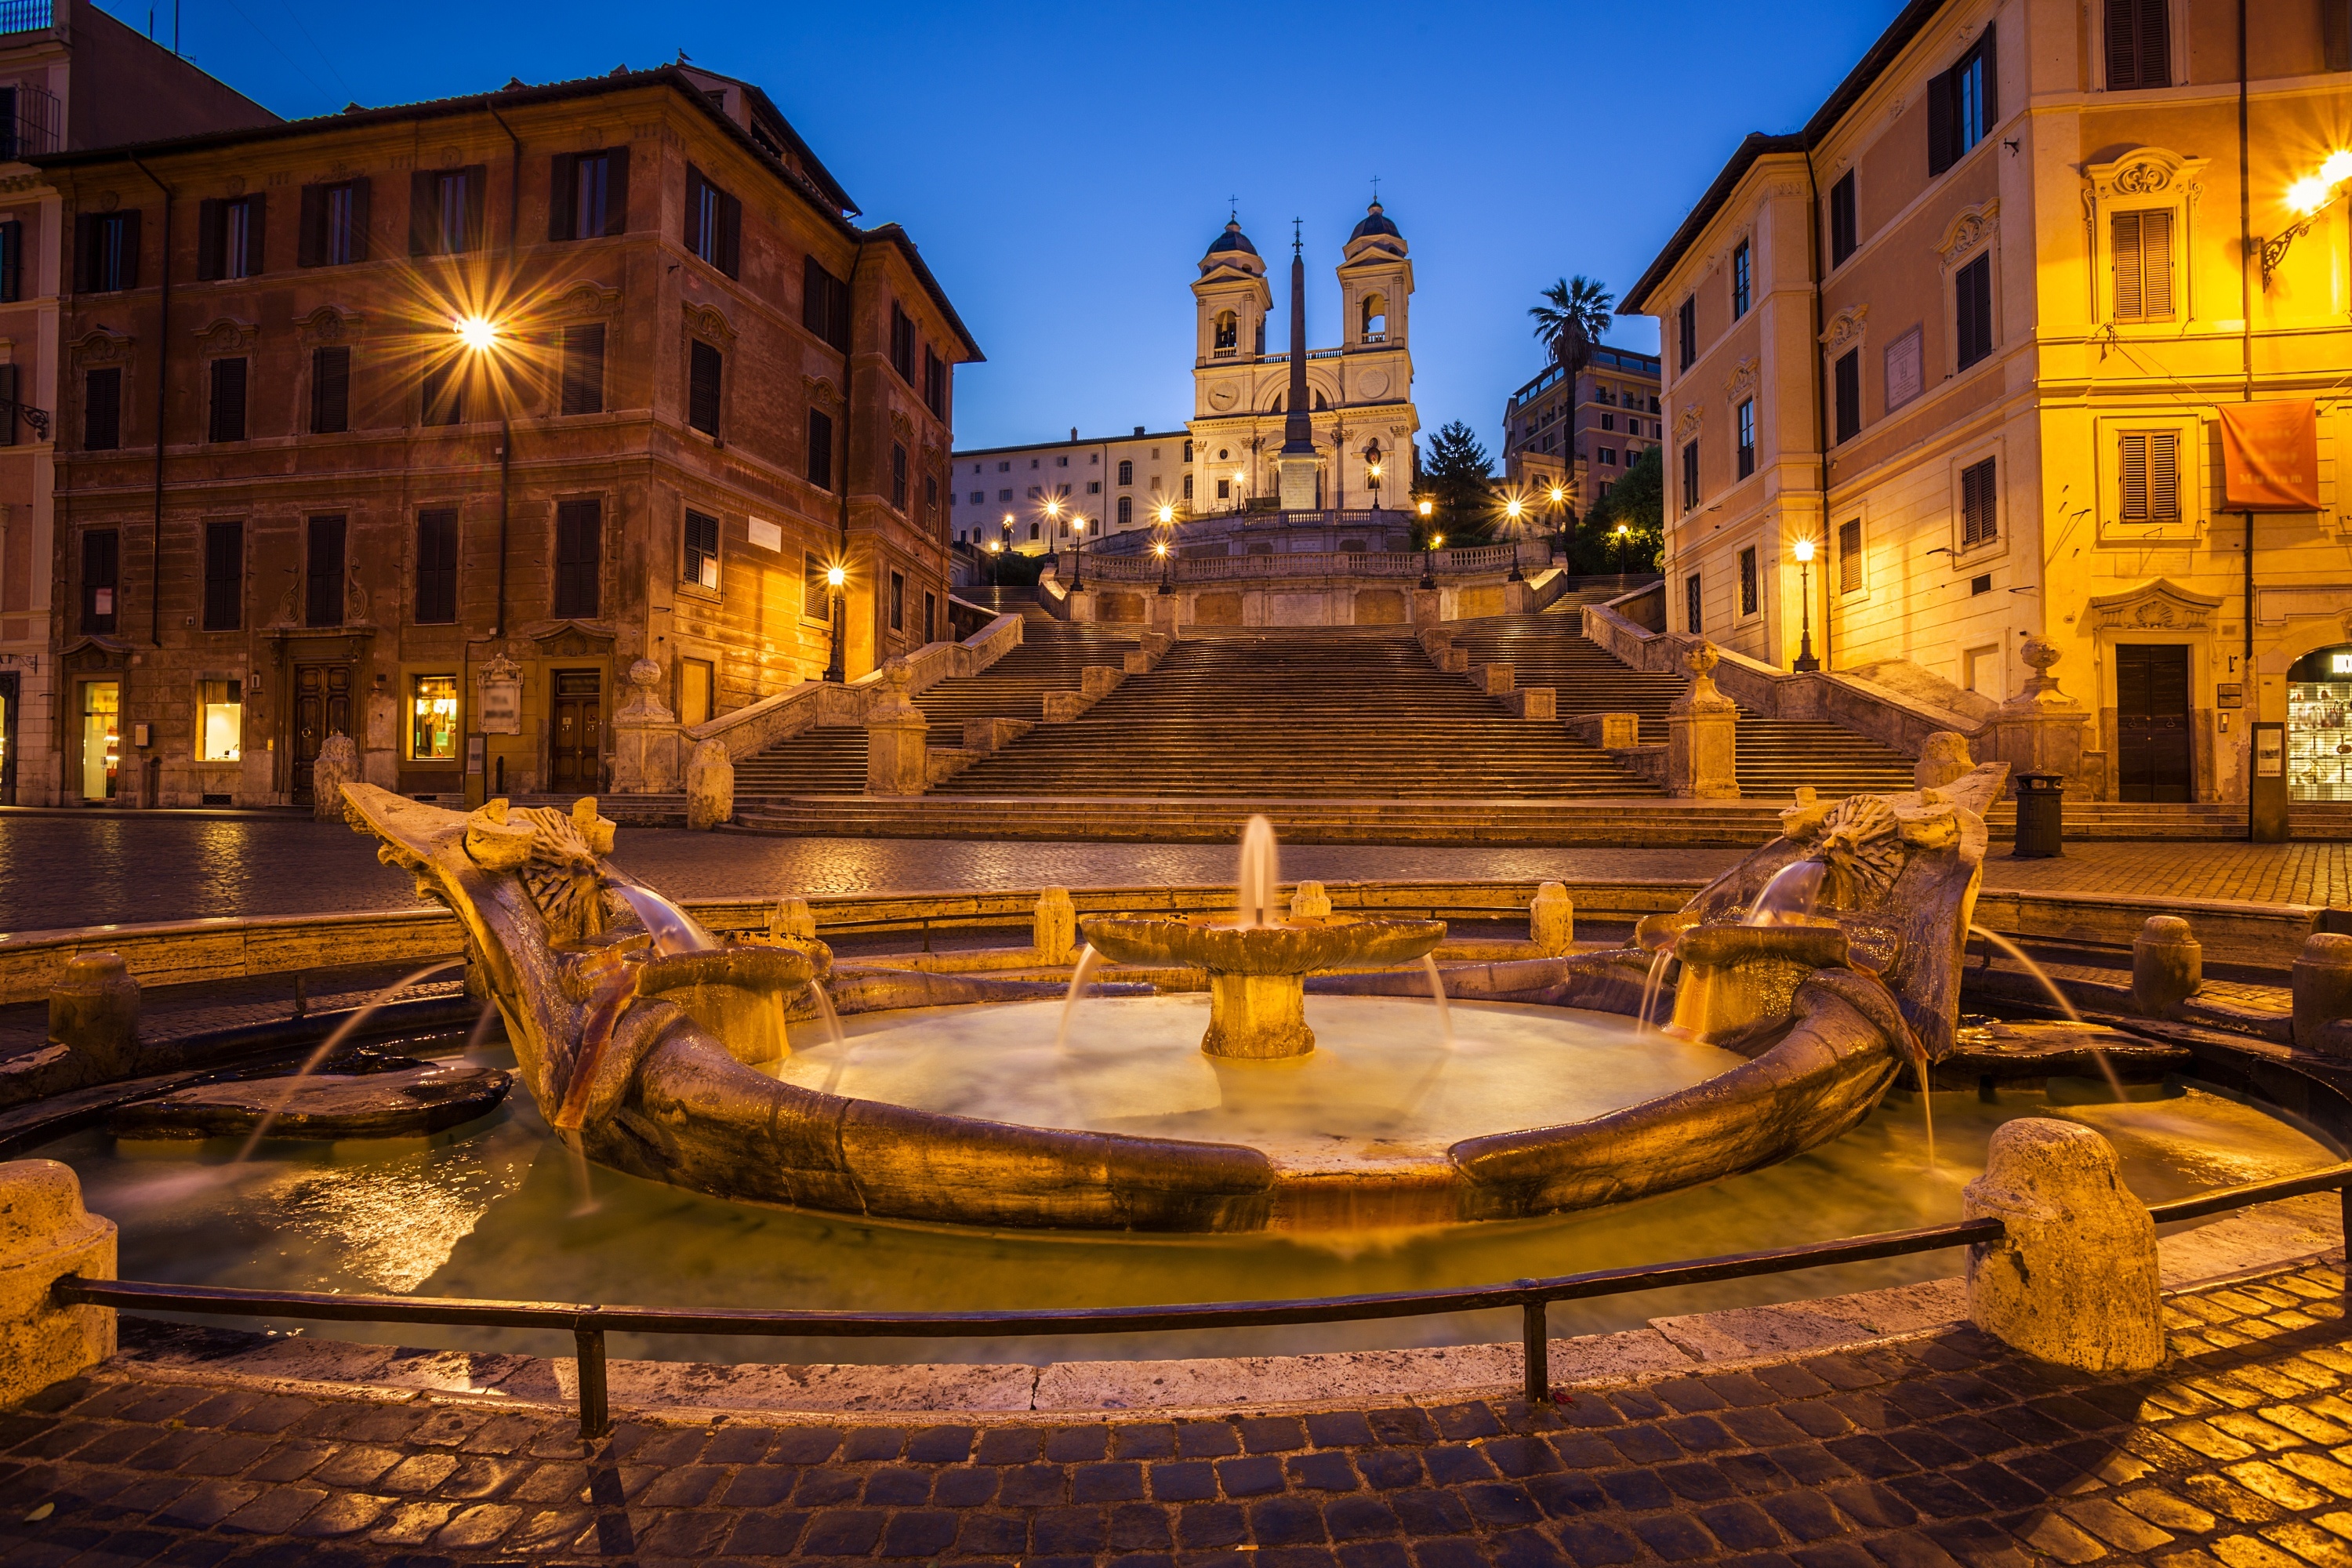 HD wallpaper, 3000X2000 Hd Desktop, Fontana Barcaccia, Nearby Places, Attraction Reviews, Spanish Steps, Desktop Hd Spanish Steps Rome Wallpaper Image